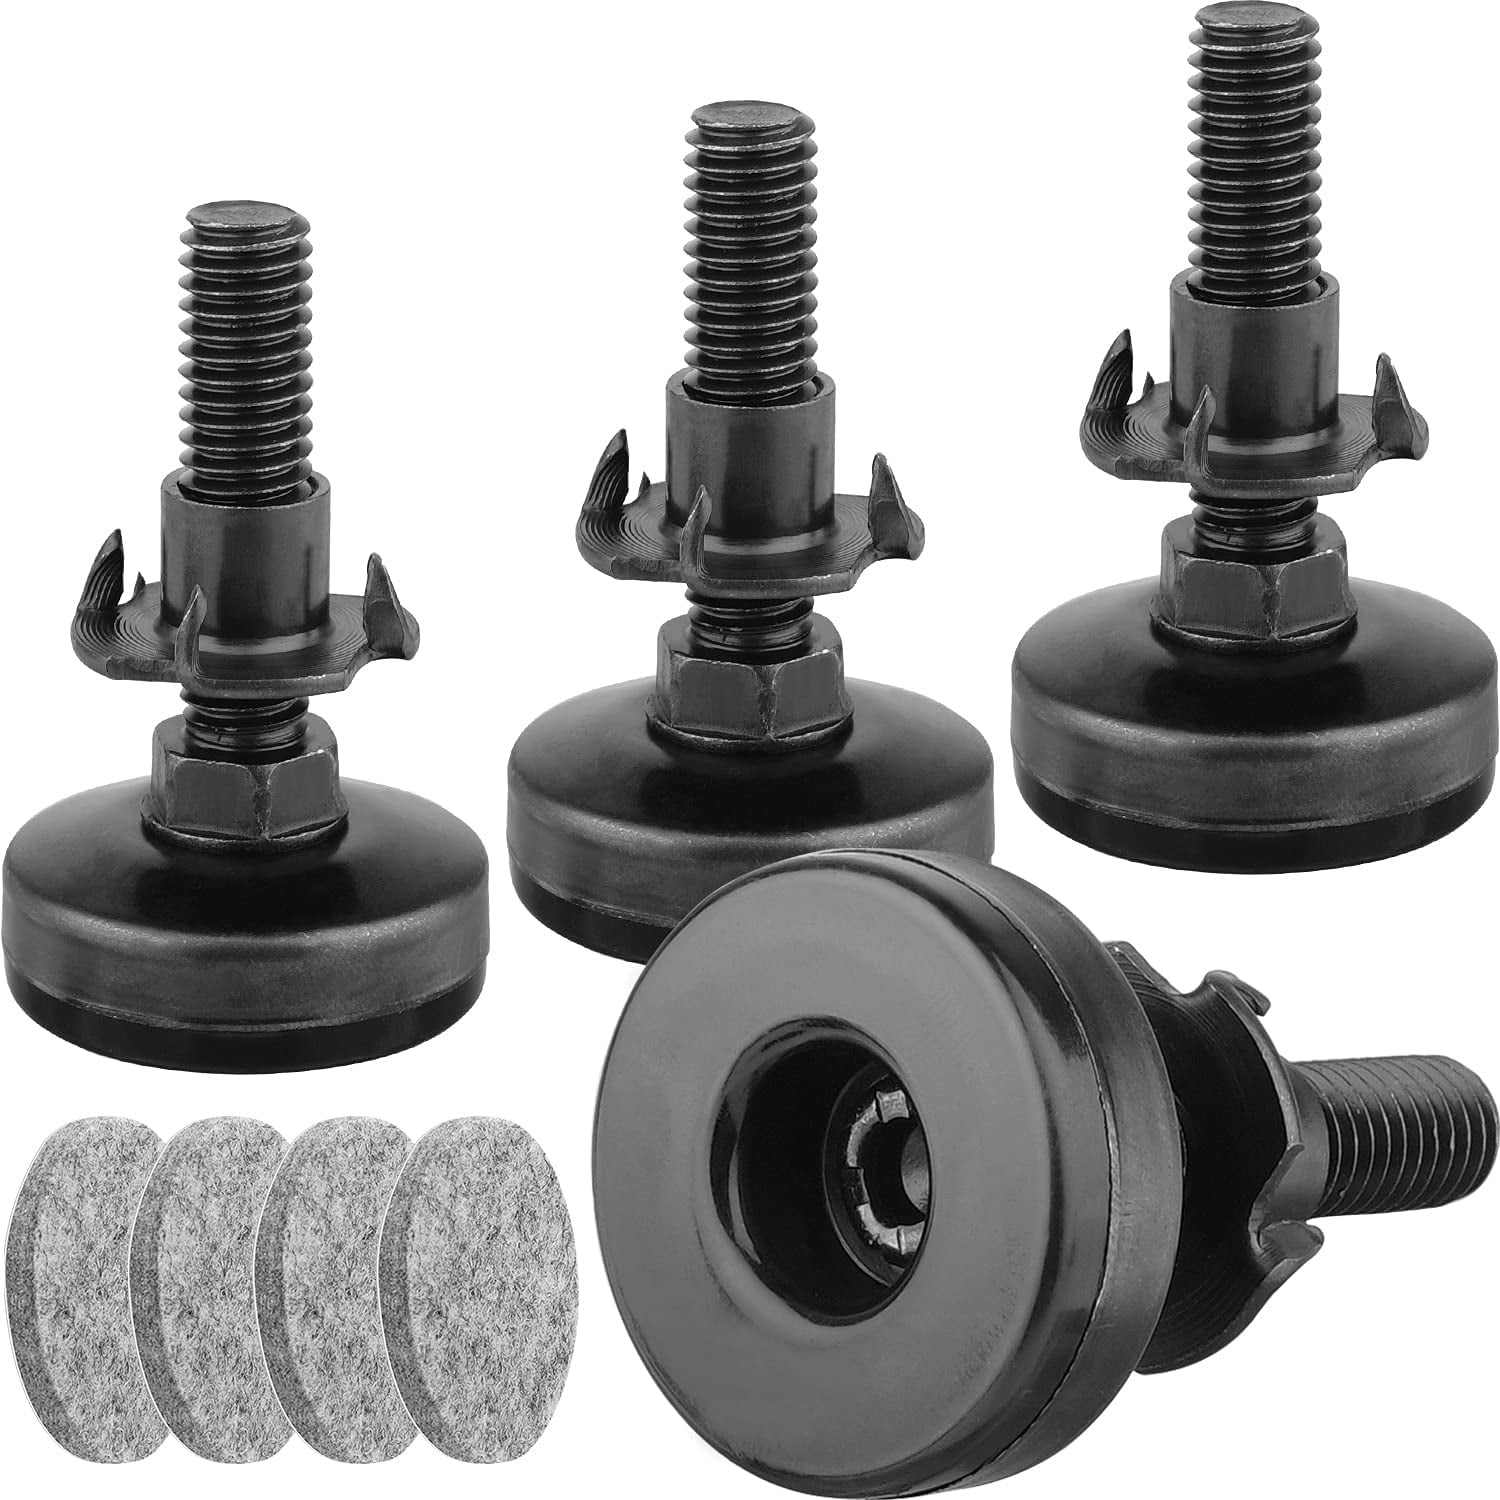 Details about   Leveling Foot 4" industrial 4 pack 